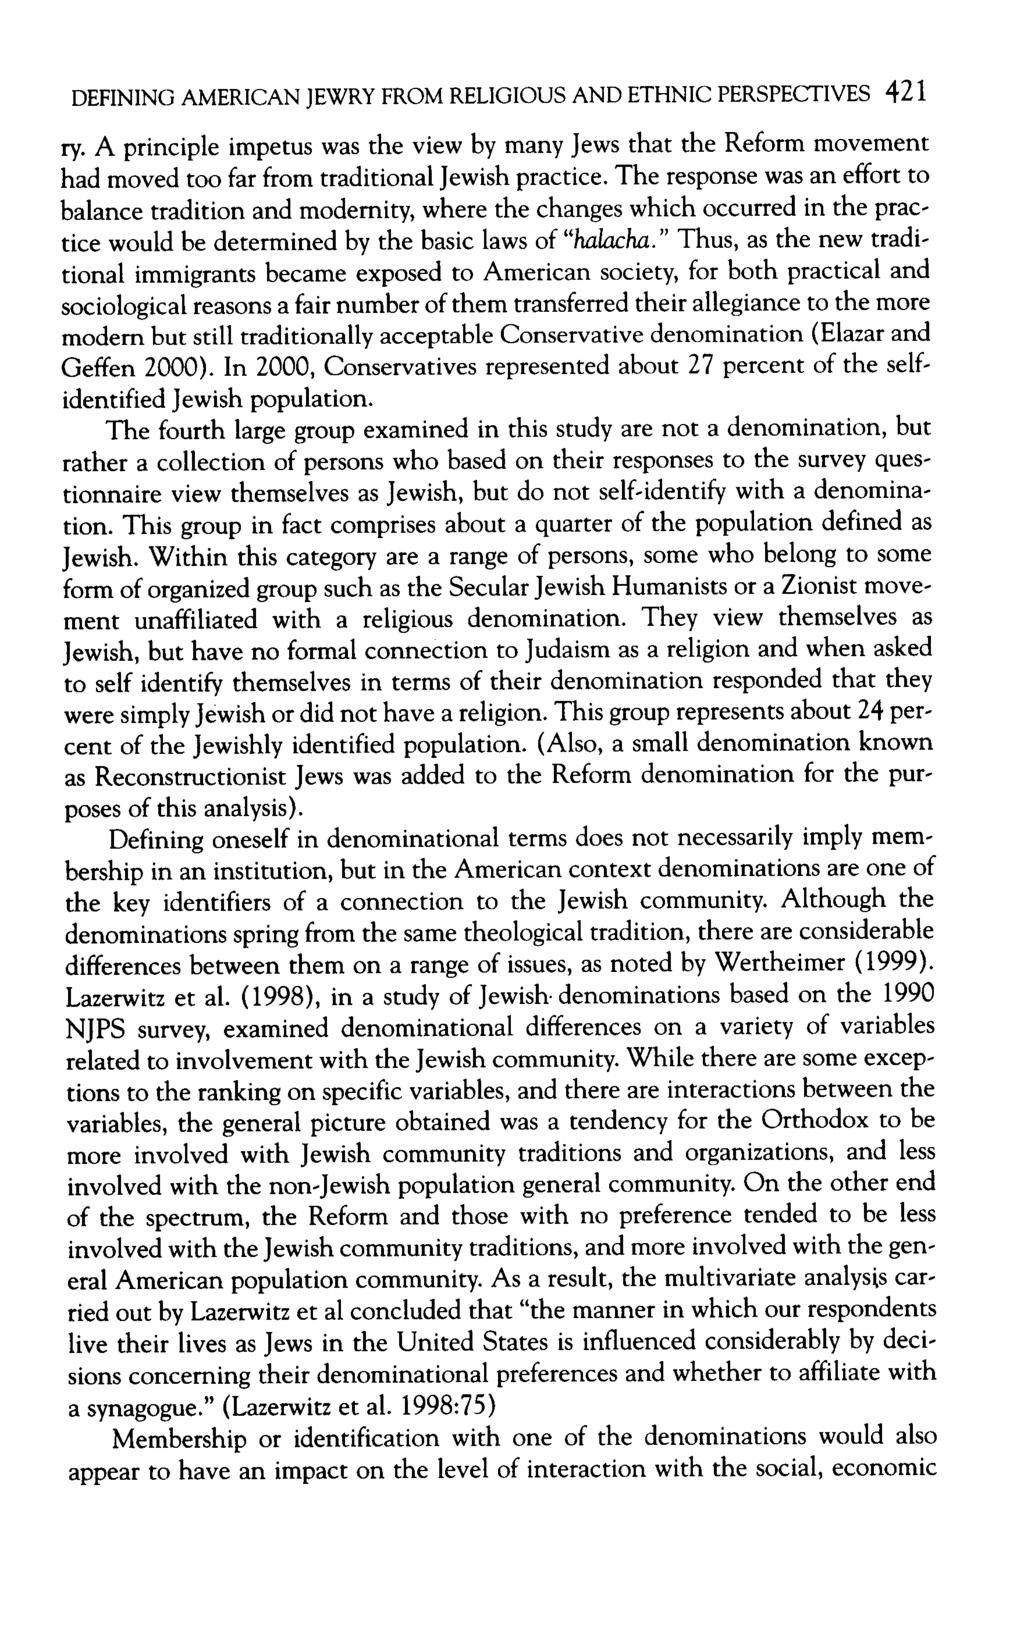 DEFINING AMERICAN JEWRY FROM RELIGIOUS AND ETHNIC PERSPECTIVES 421 ry. A principle impetus was the view by many Jews that the Reform movement had moved too far from traditional Jewish practice.